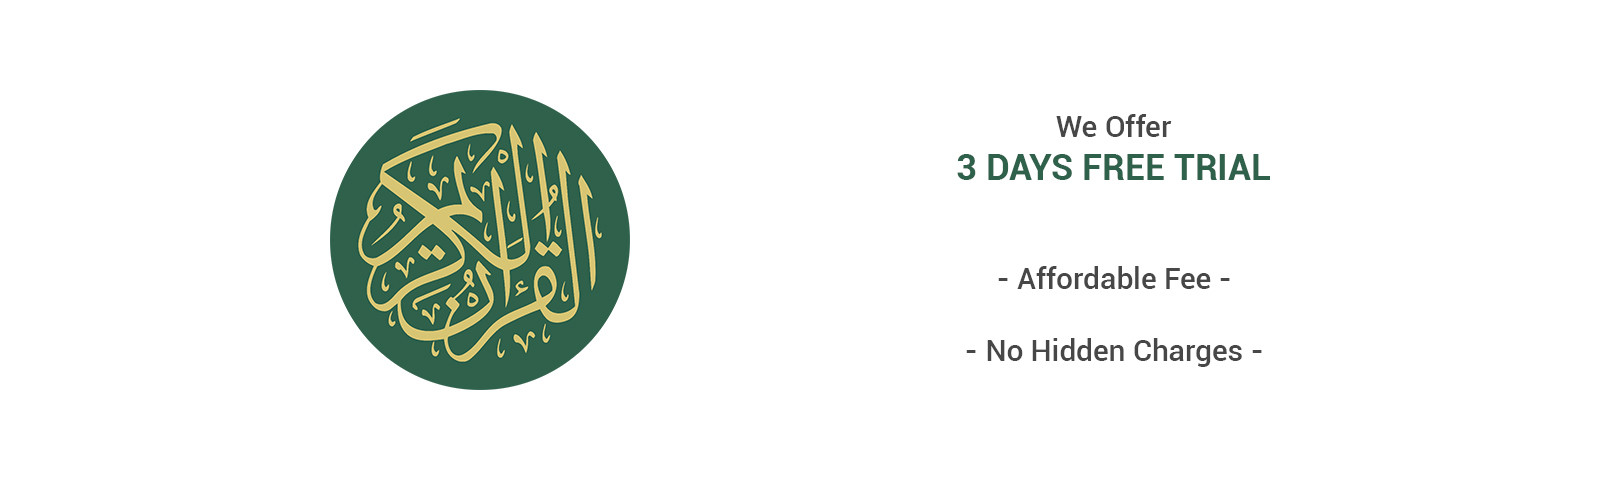 Best Online Quran Academy – 3 Days Absolutely Free Trial